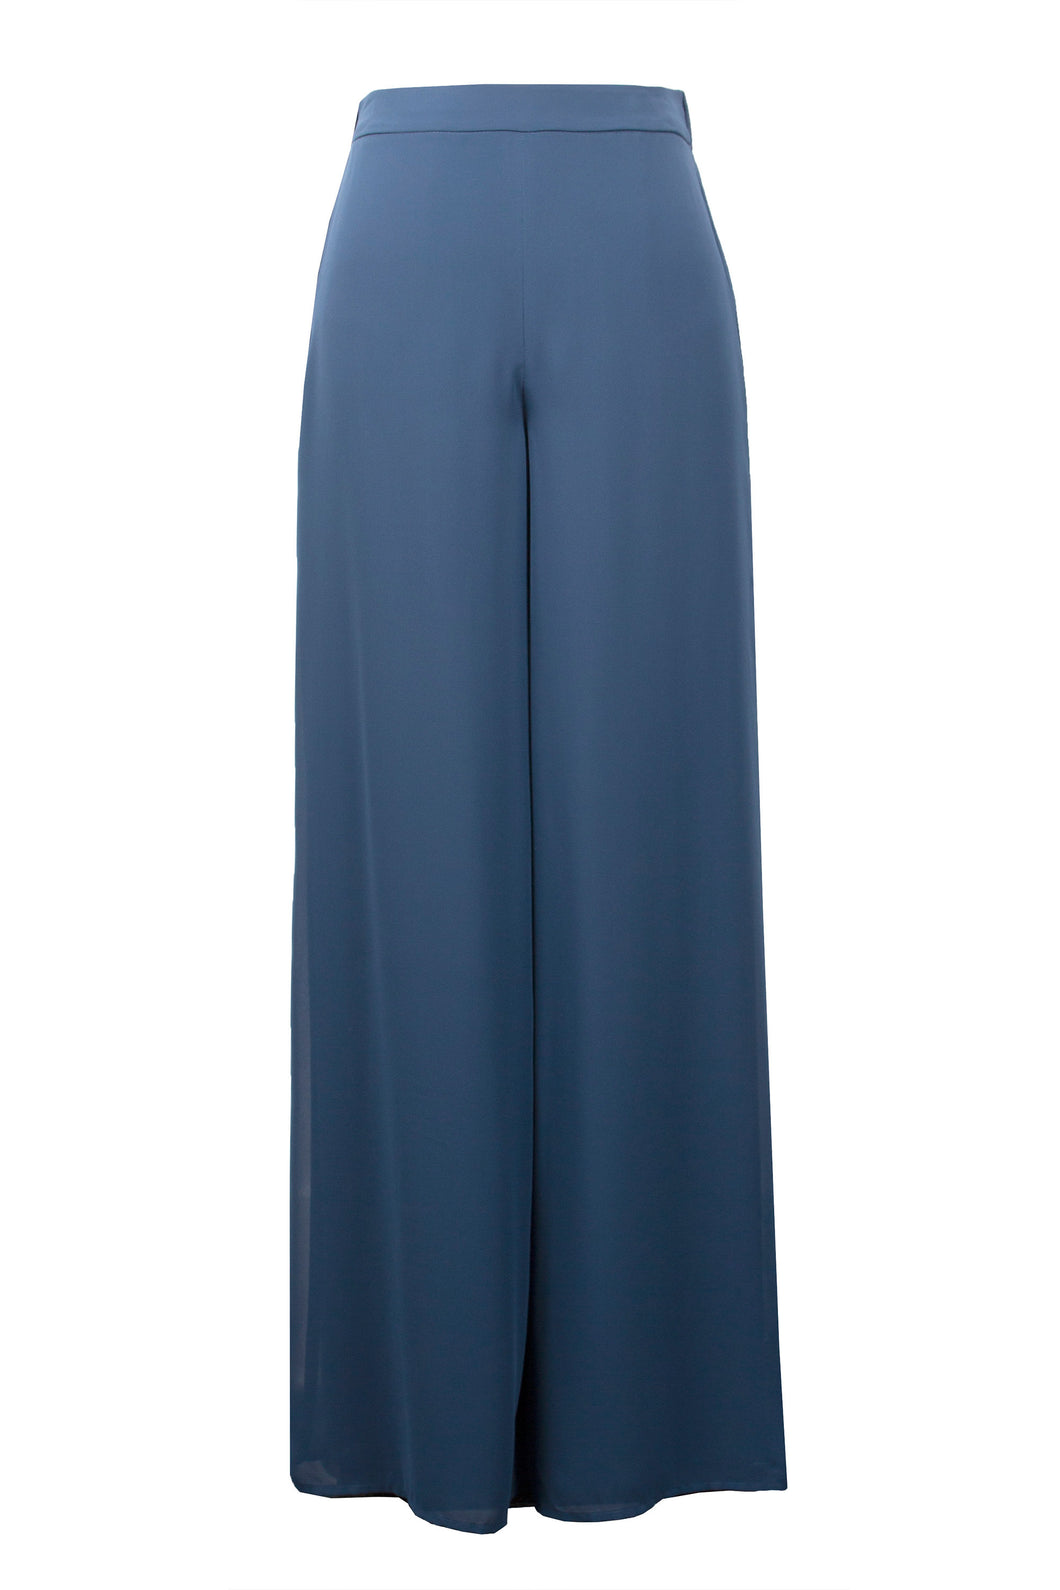 STRIPPED BLUE Print Palazzo Pants. Formal Wear/ Lounge Wear/ Fashion  Resorts/ Cruse Vacations/ Dance/ Every Day Wear. -  Canada